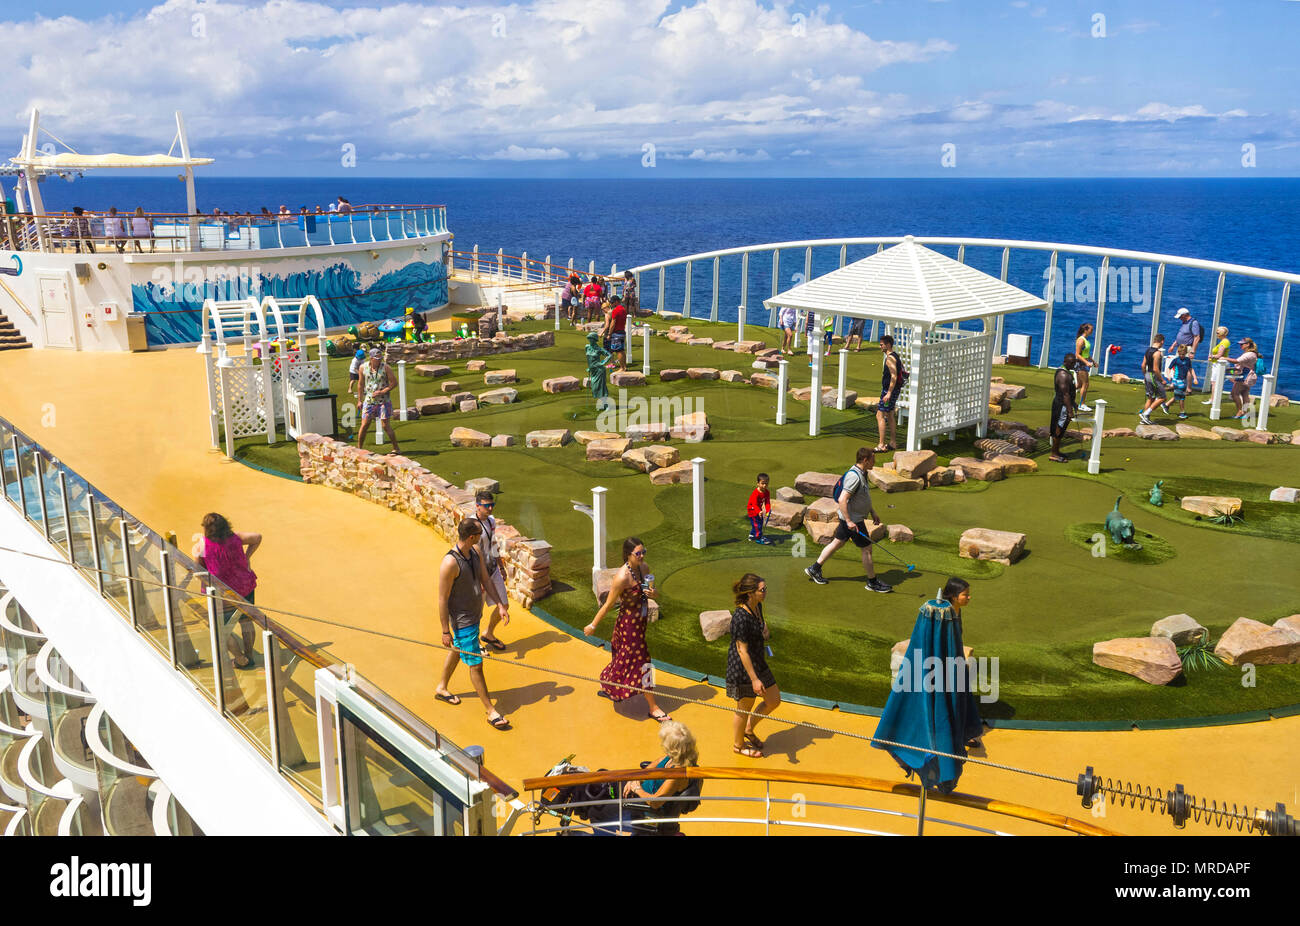 Cape Canaveral, USA - April 30, 2018: The upper deck with .mini golf court at cruise liner or ship Oasis of the Seas by Royal Caribbean Stock Photo